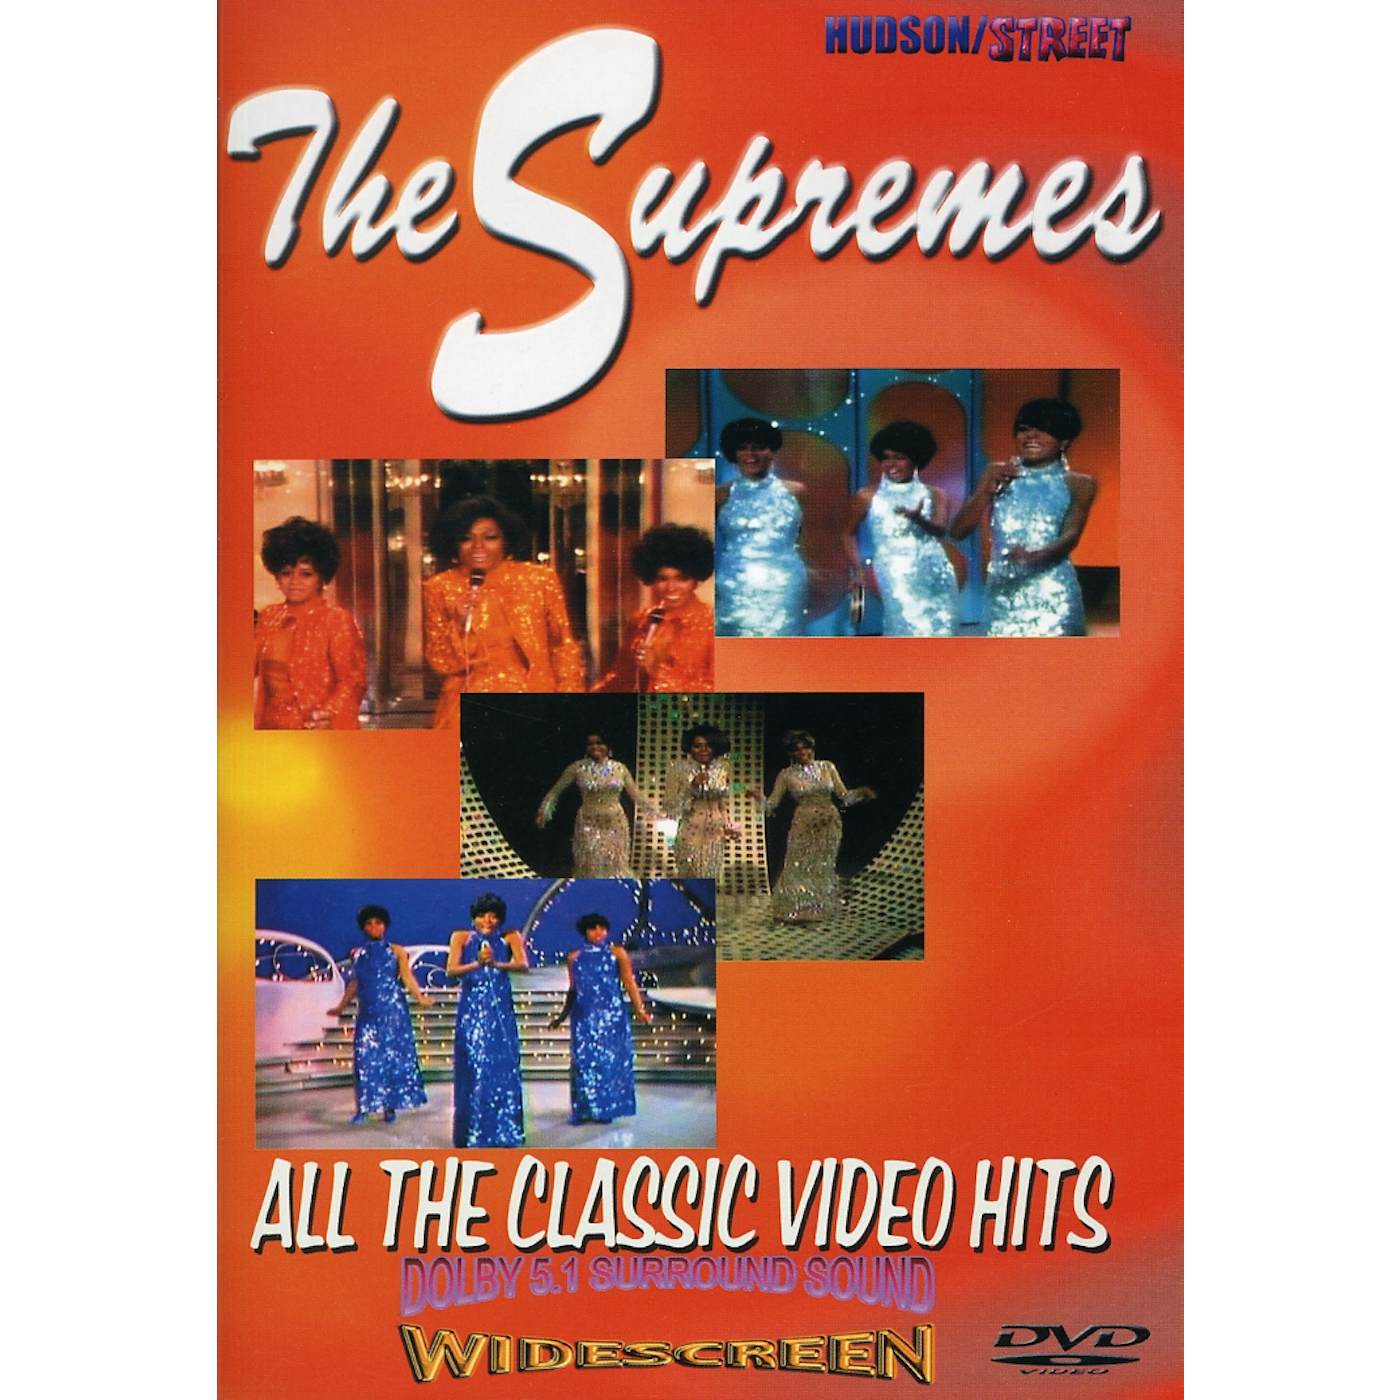 The Supremes CLASSIC VIDEO HITS DVD